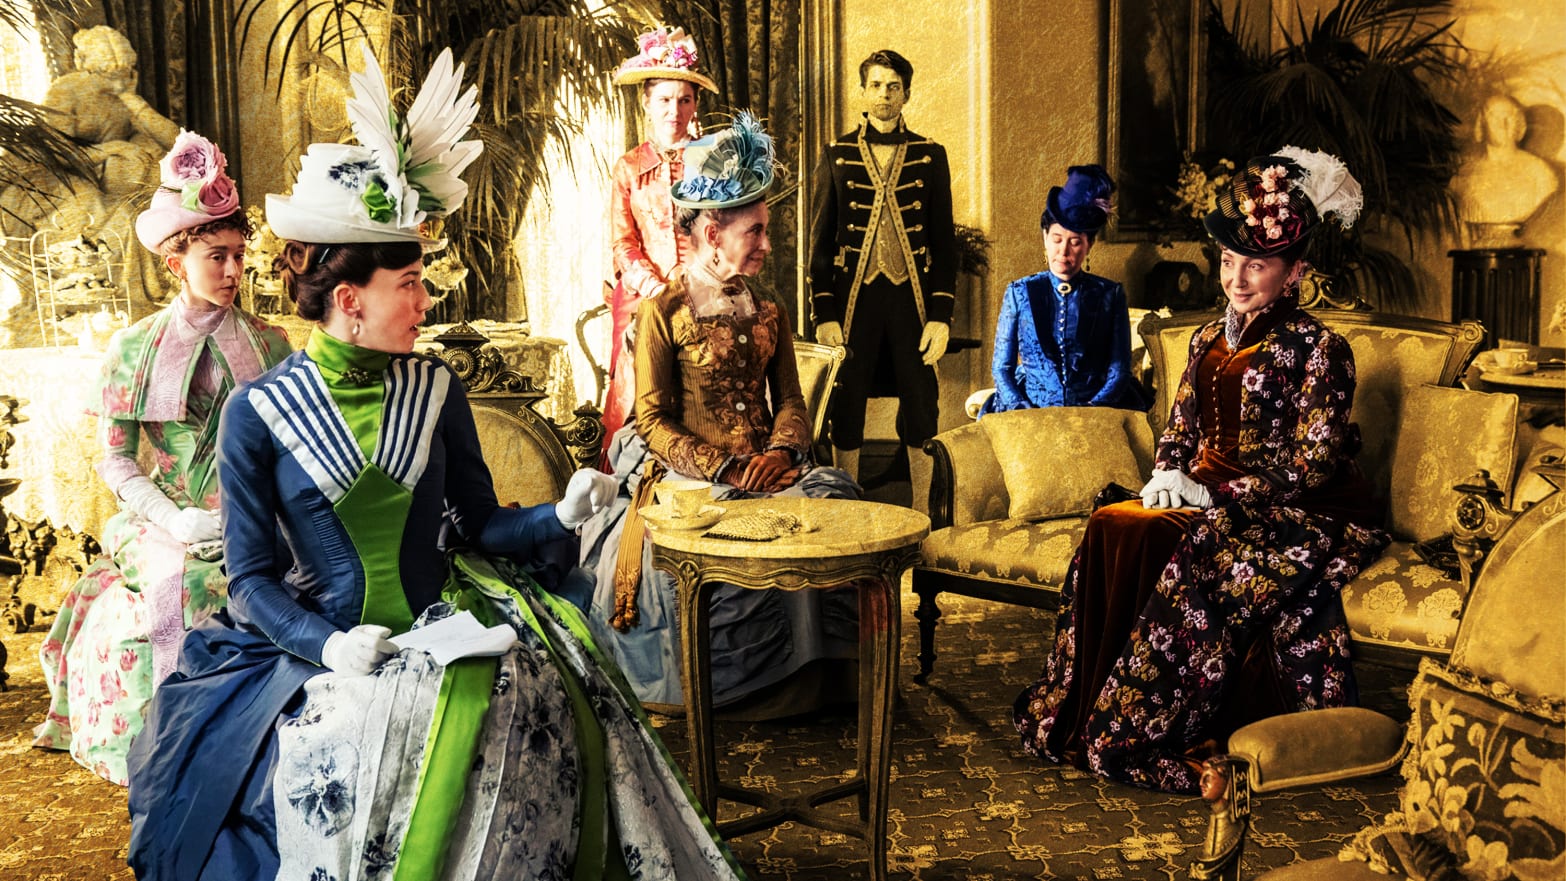 A photo illustration of the Gilded Age season 2 cast.